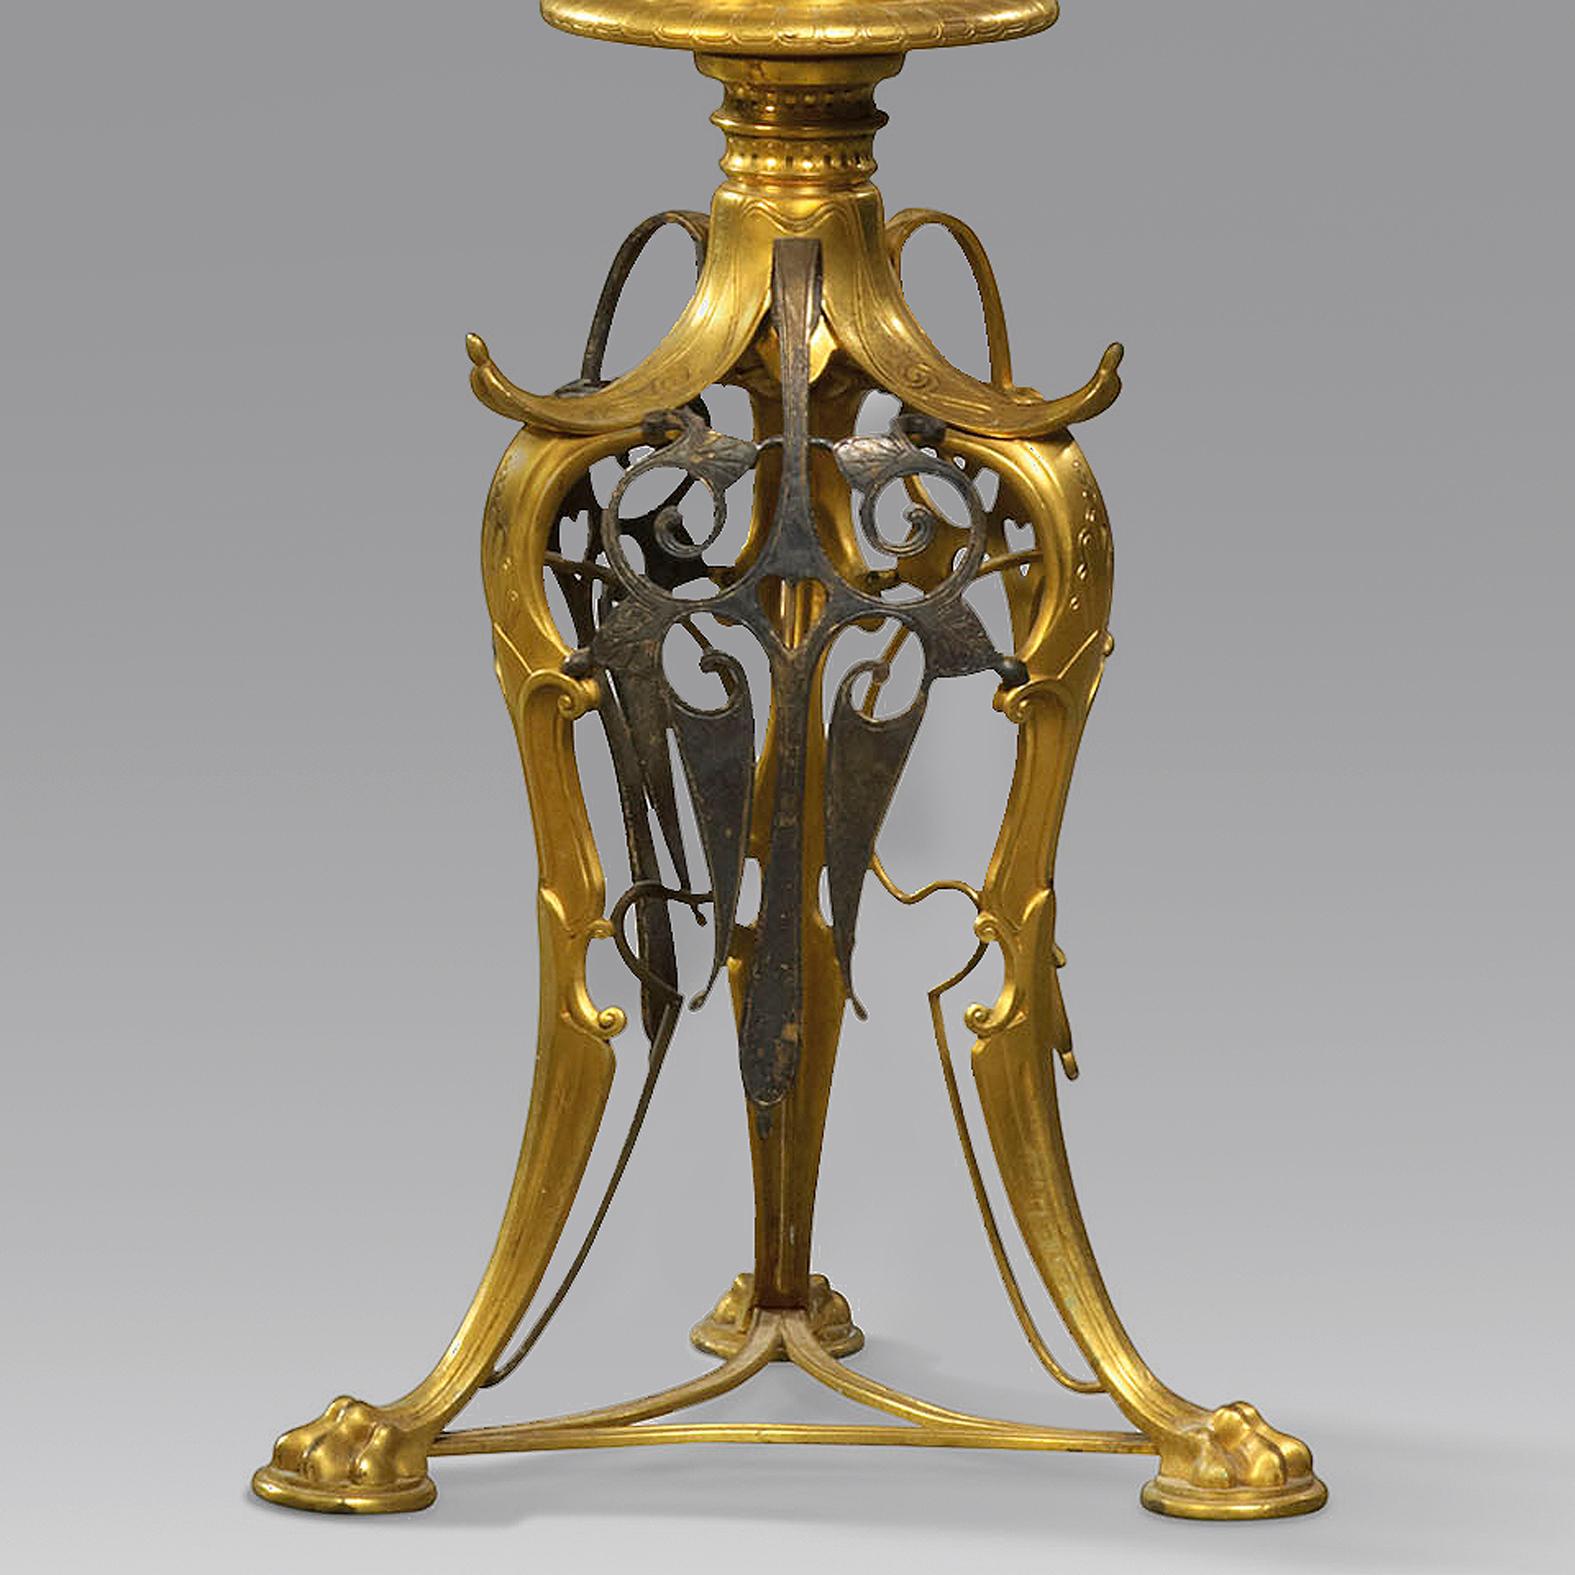 A Pair of Rare 'Neo-Grec' Gilt and Patinated Bronze Torchère Stands, Attributed to Ferdinand Barbedienne.

Each torchere has an inset marble top with suspended chains, raised on a fluted column cast with acanthus and supported by a tripod base cast